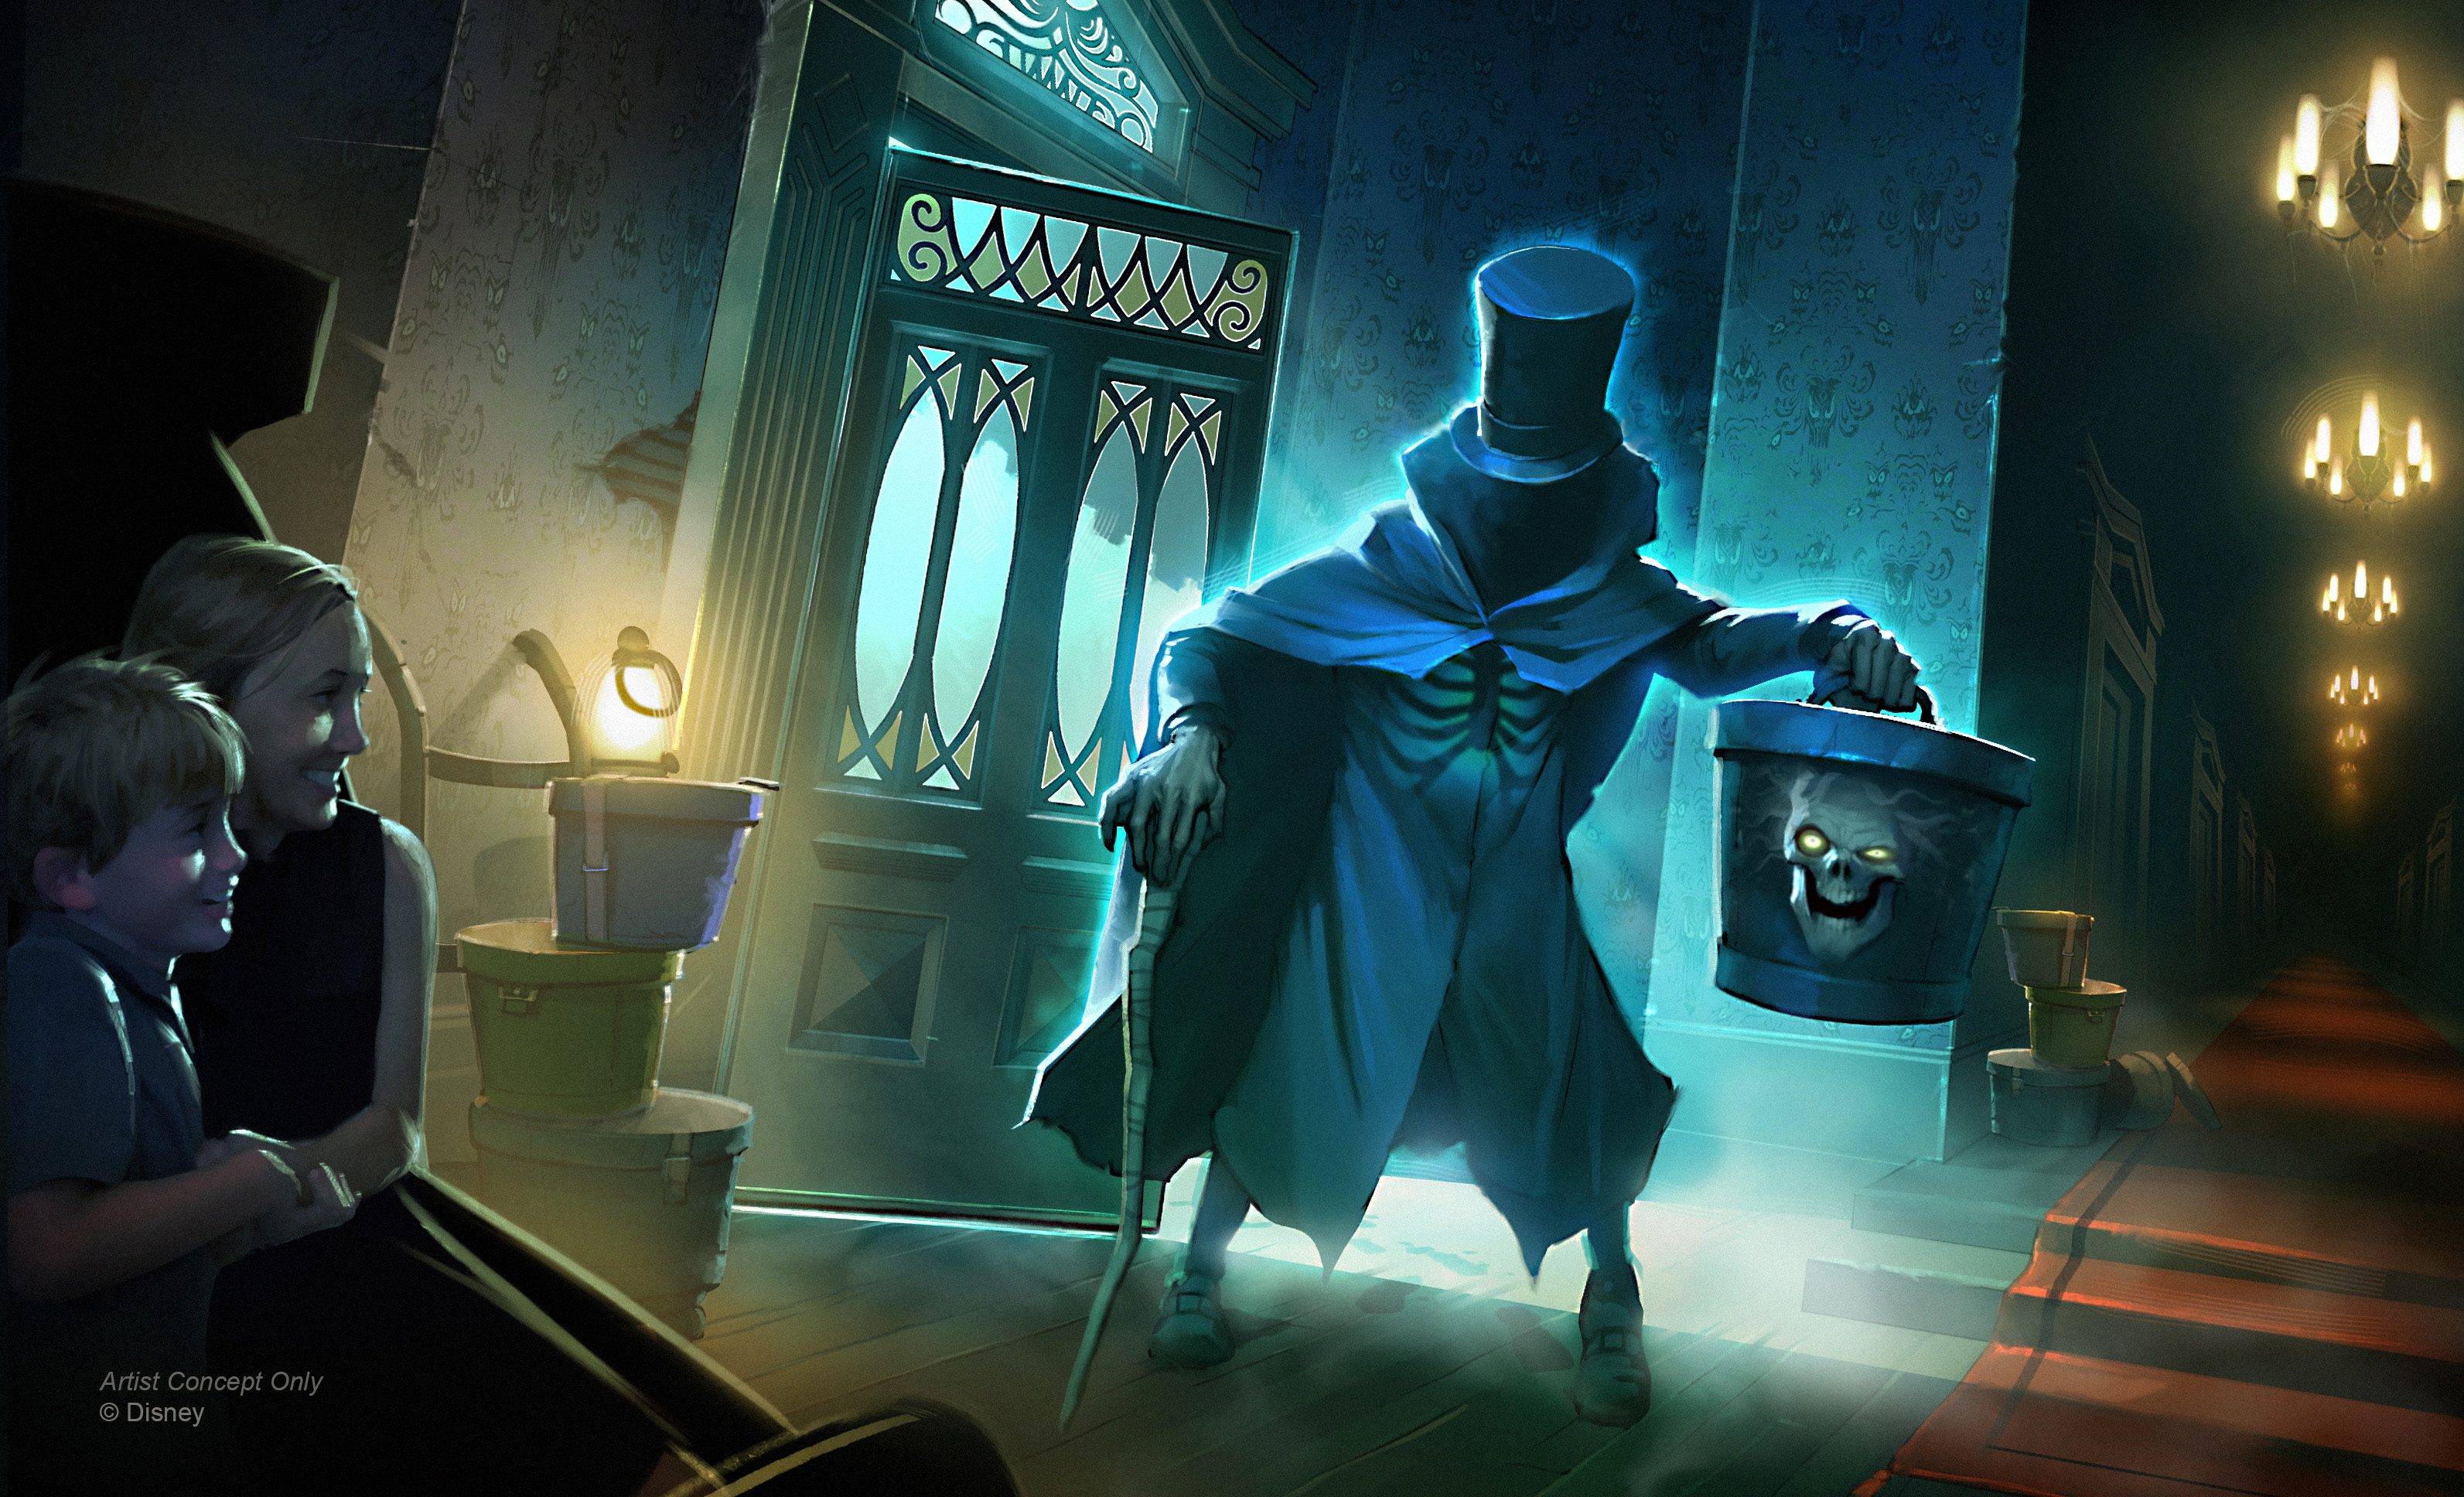 Disney shares update on the Hatbox Ghost coming to Magic Kingdom, including his location in the ride